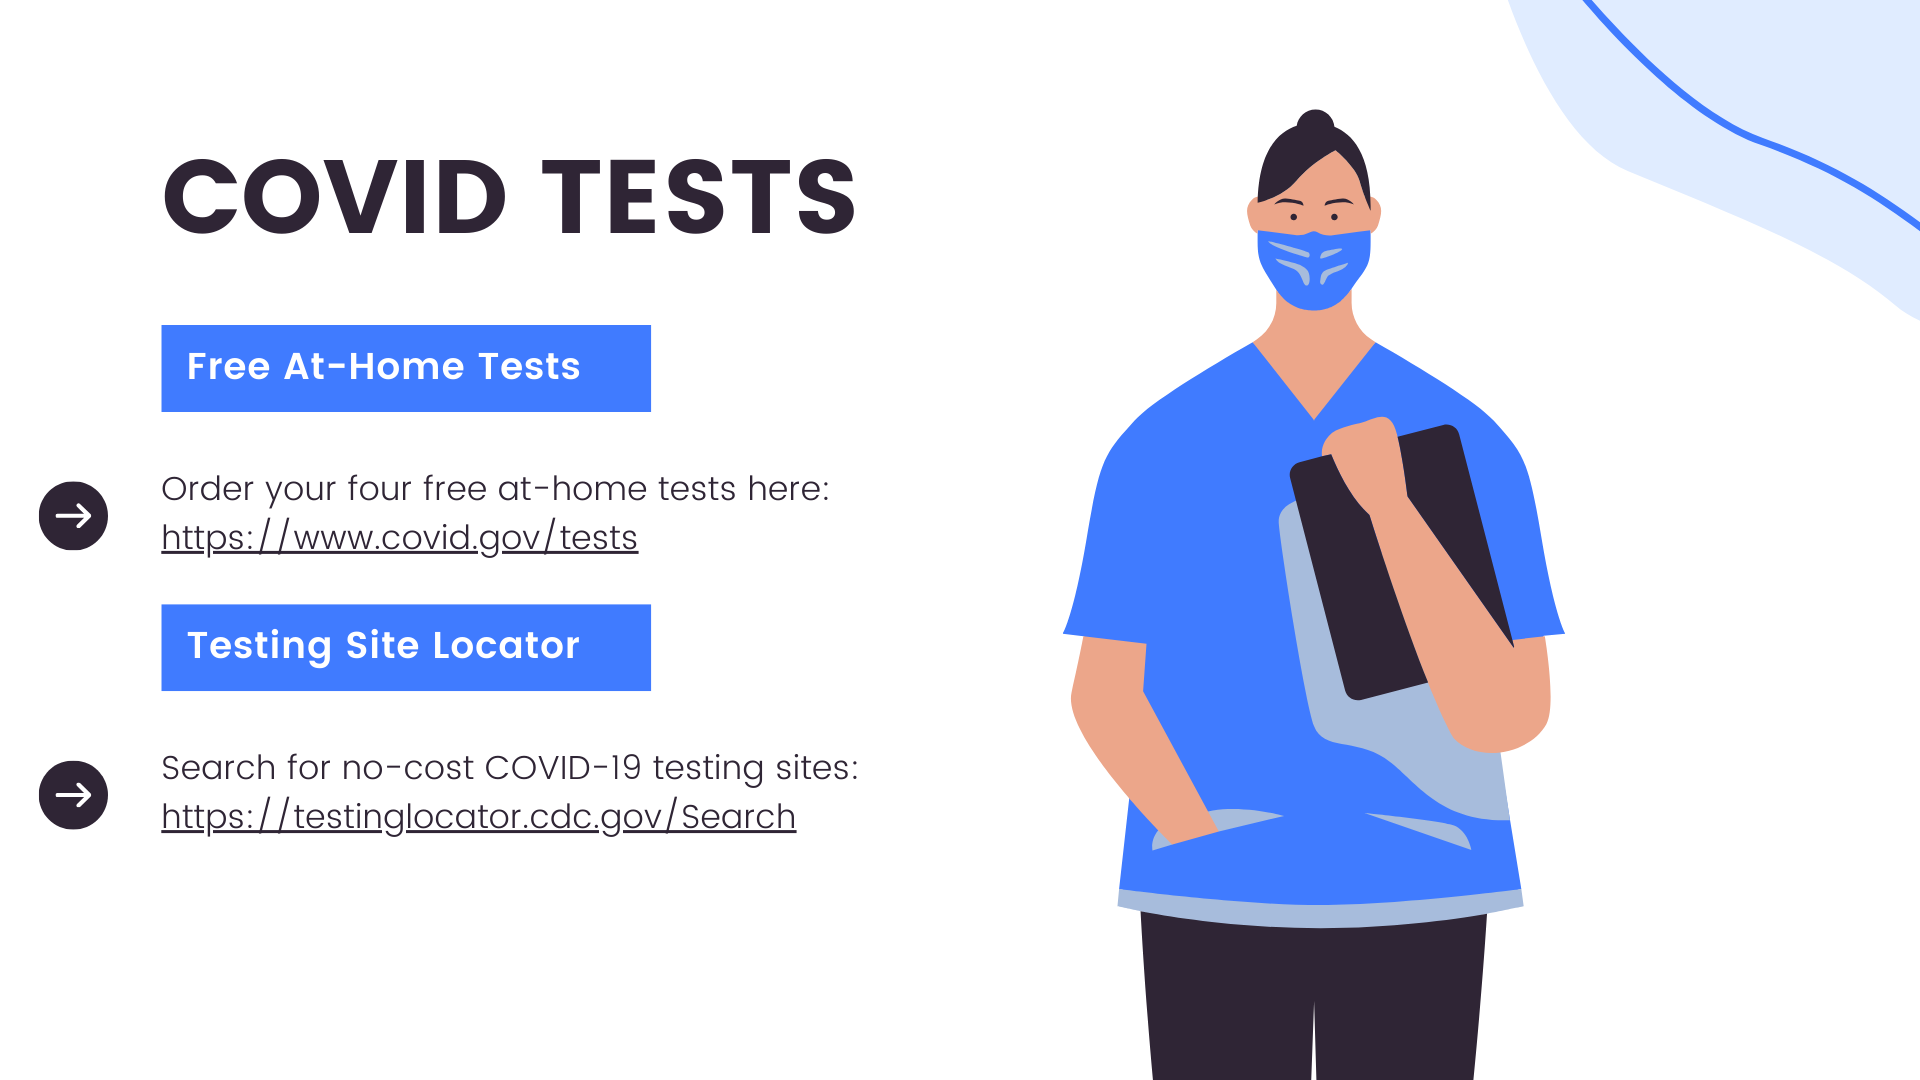 Free covid tests and a testing site locator